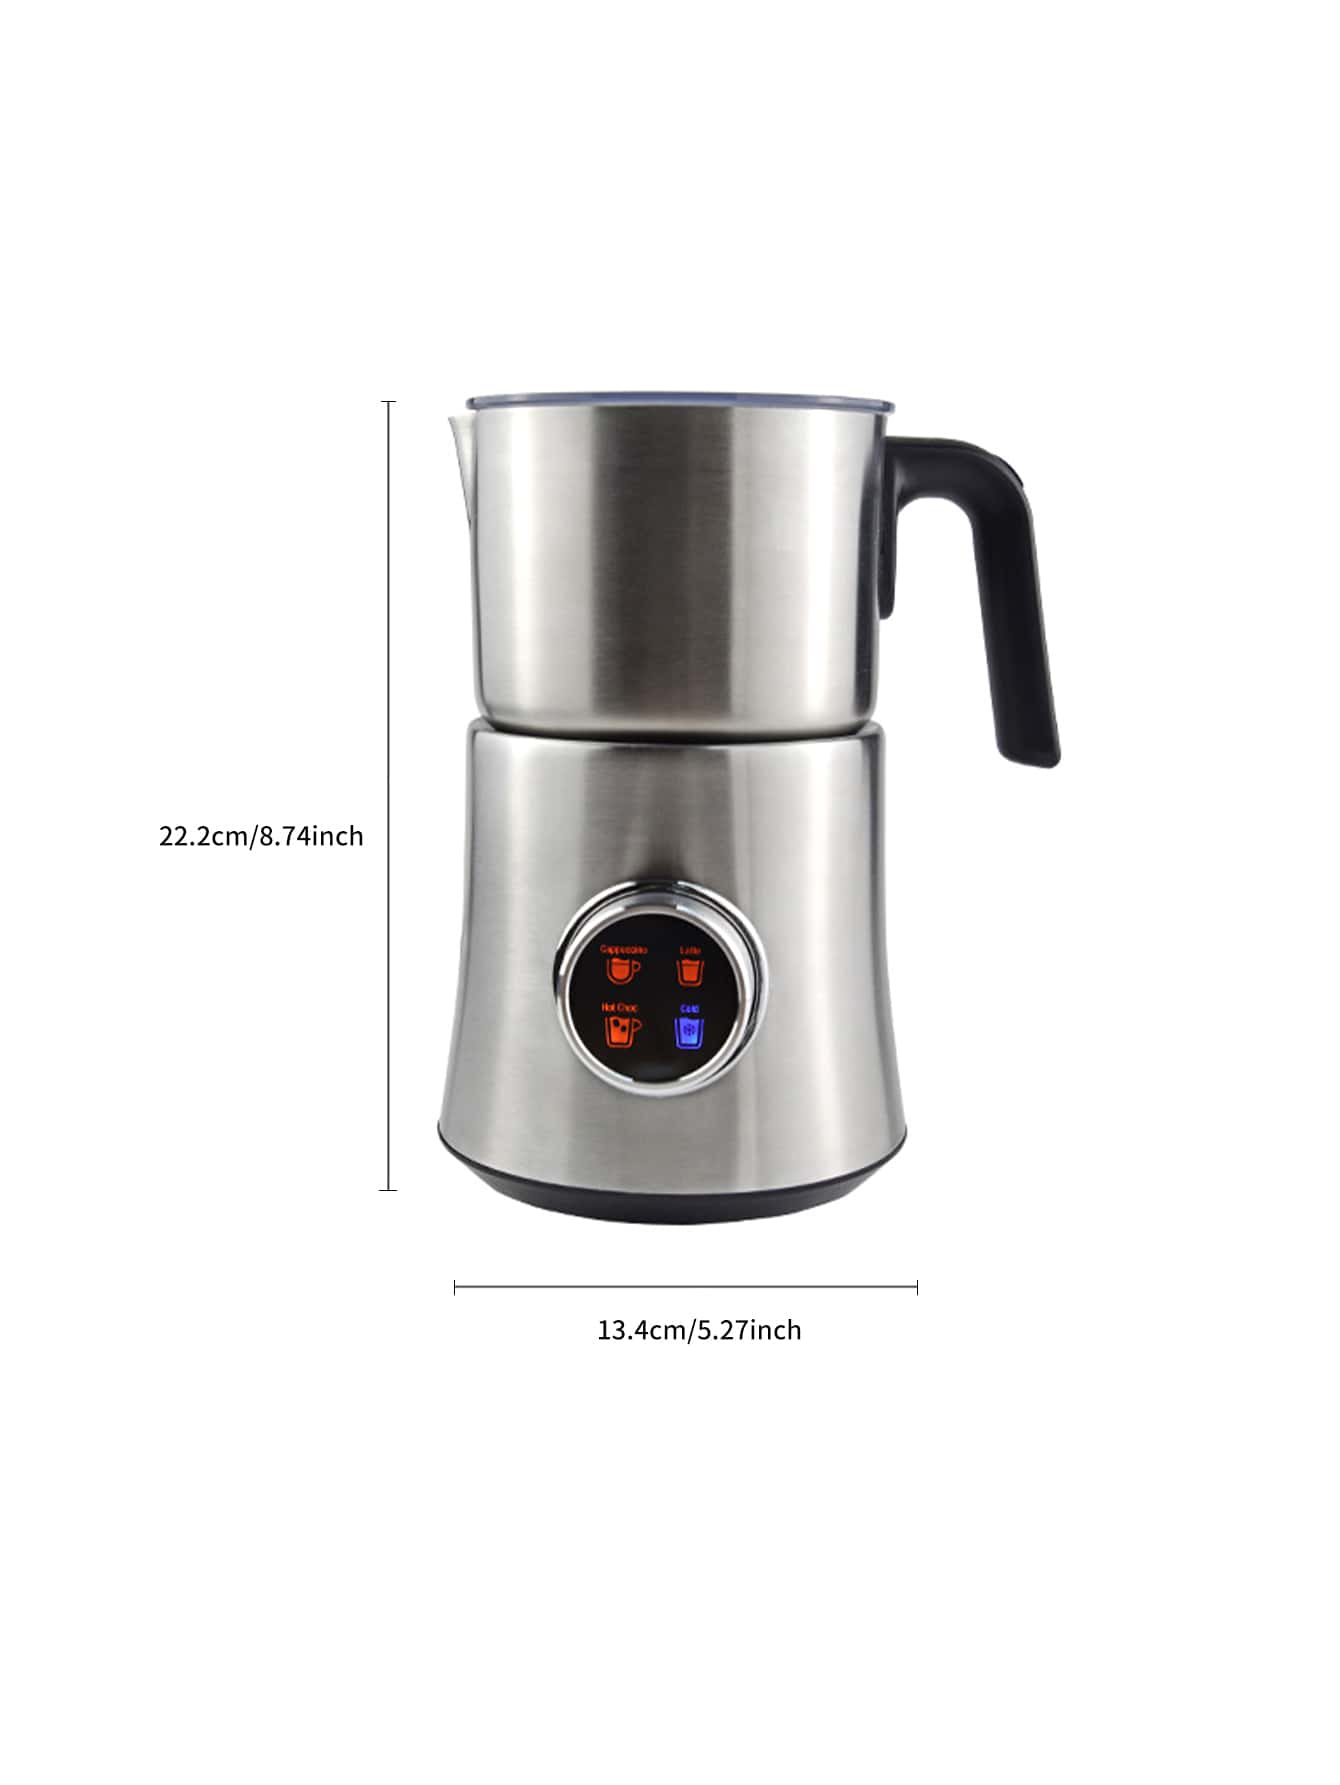 1pc Electric Milk Frother Mf06, Stainless Steel, Ideal For Home Use To Make Coffee Latte Art And Foamed Milk-Silver-4